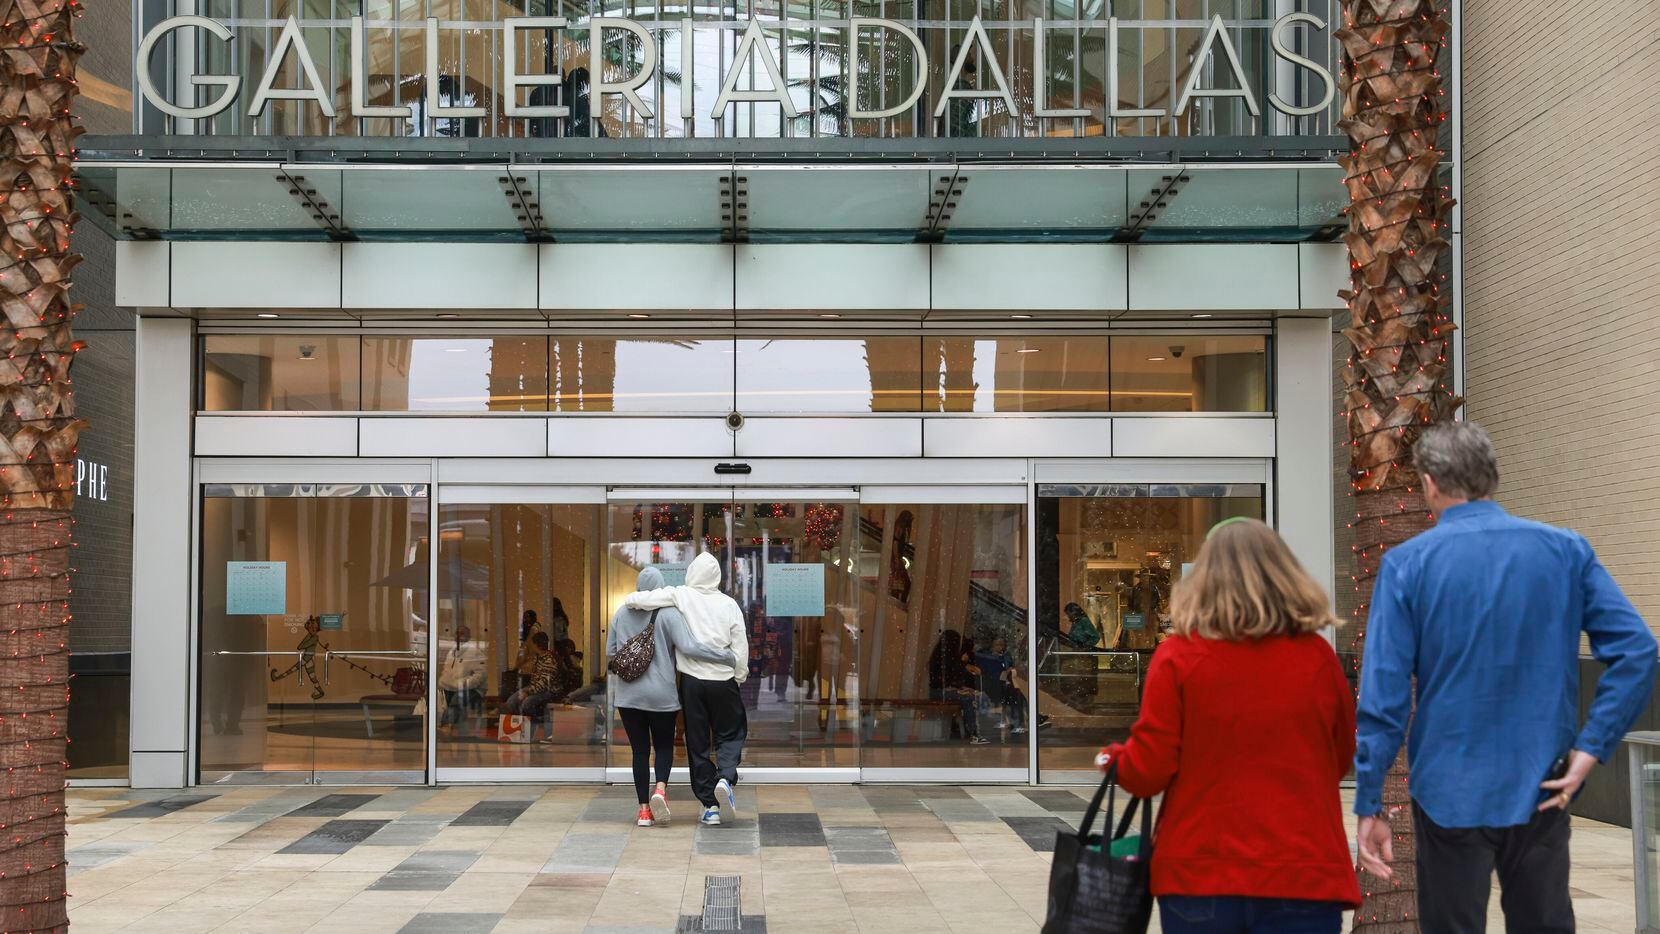 A unit of Metropolitan Life Insurance has taken over the deed to Galleria Dallas.